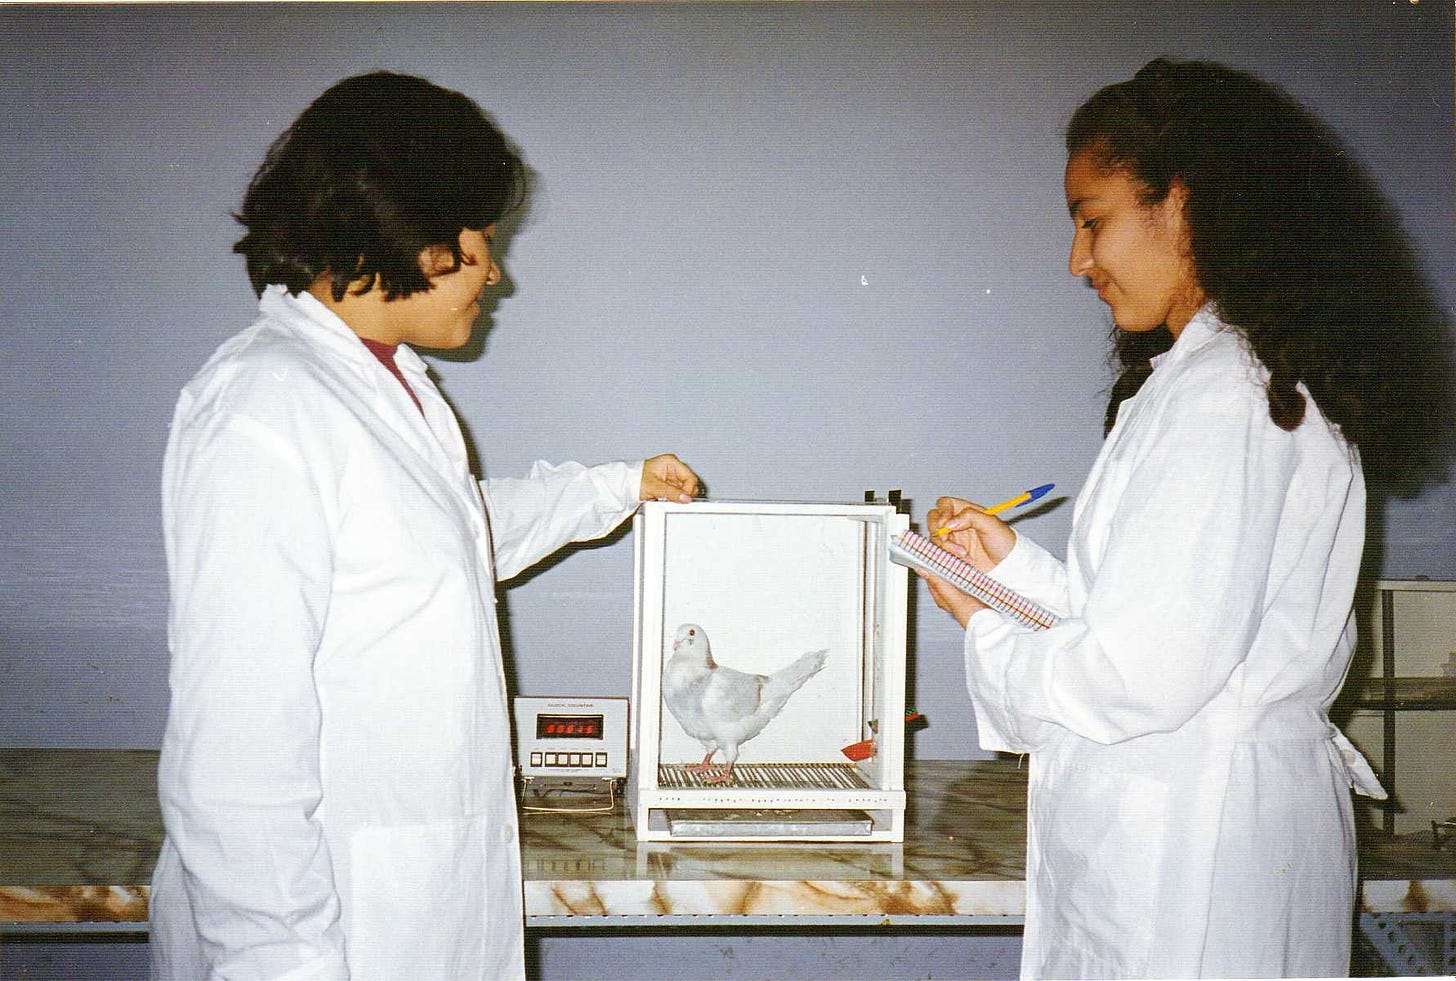 Lab researchers stand next to a pigeon in an experimental case.